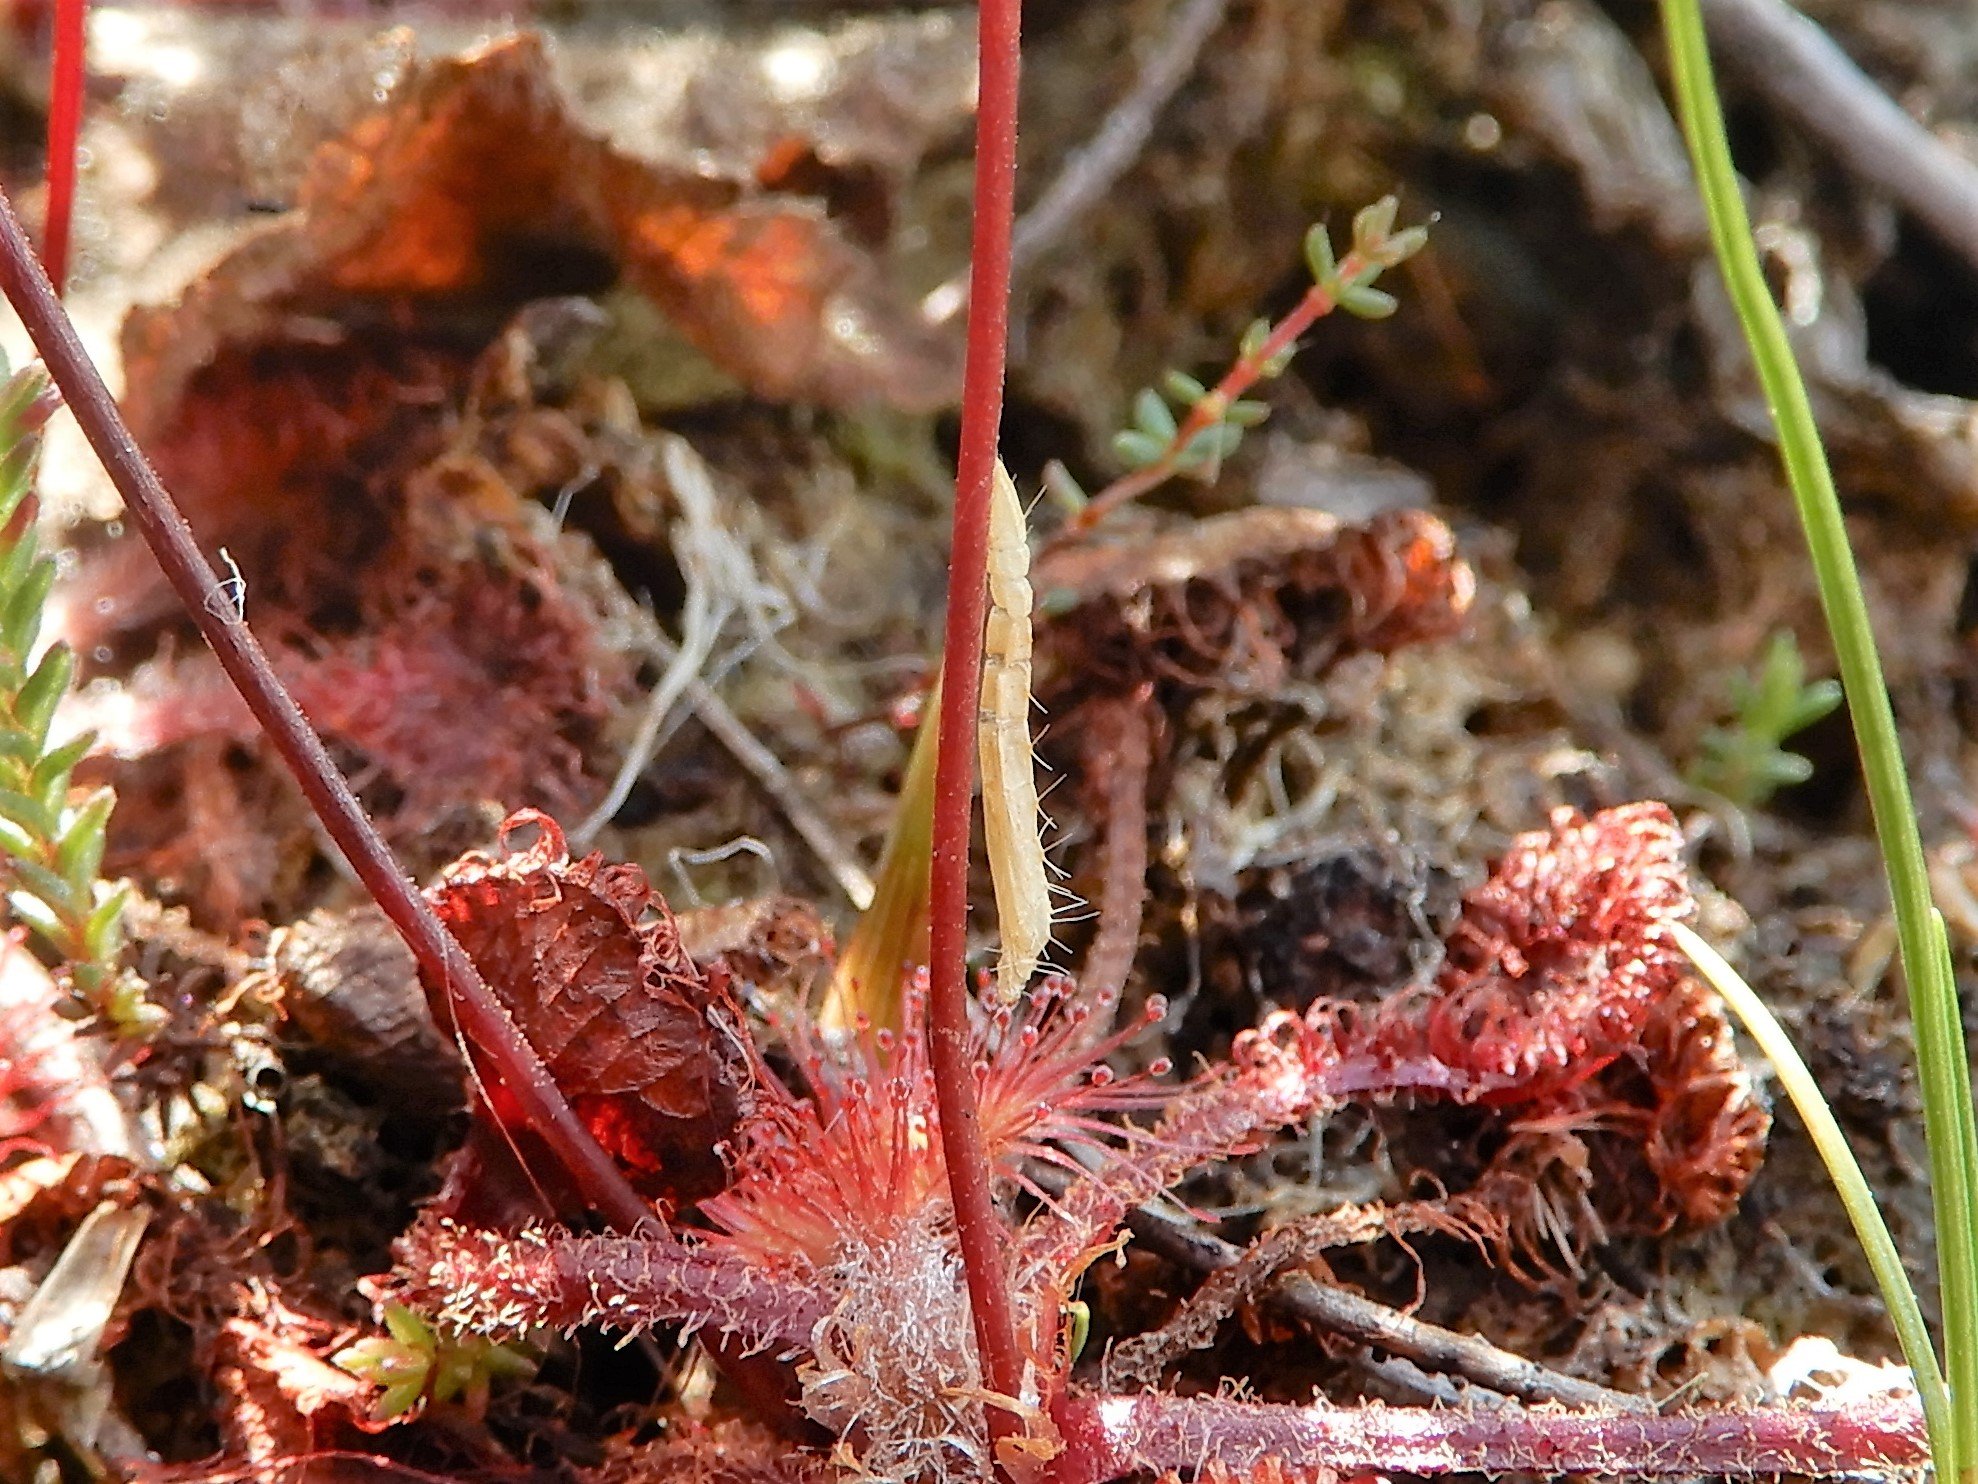 Sundew Plume Moth exuviating from pupa